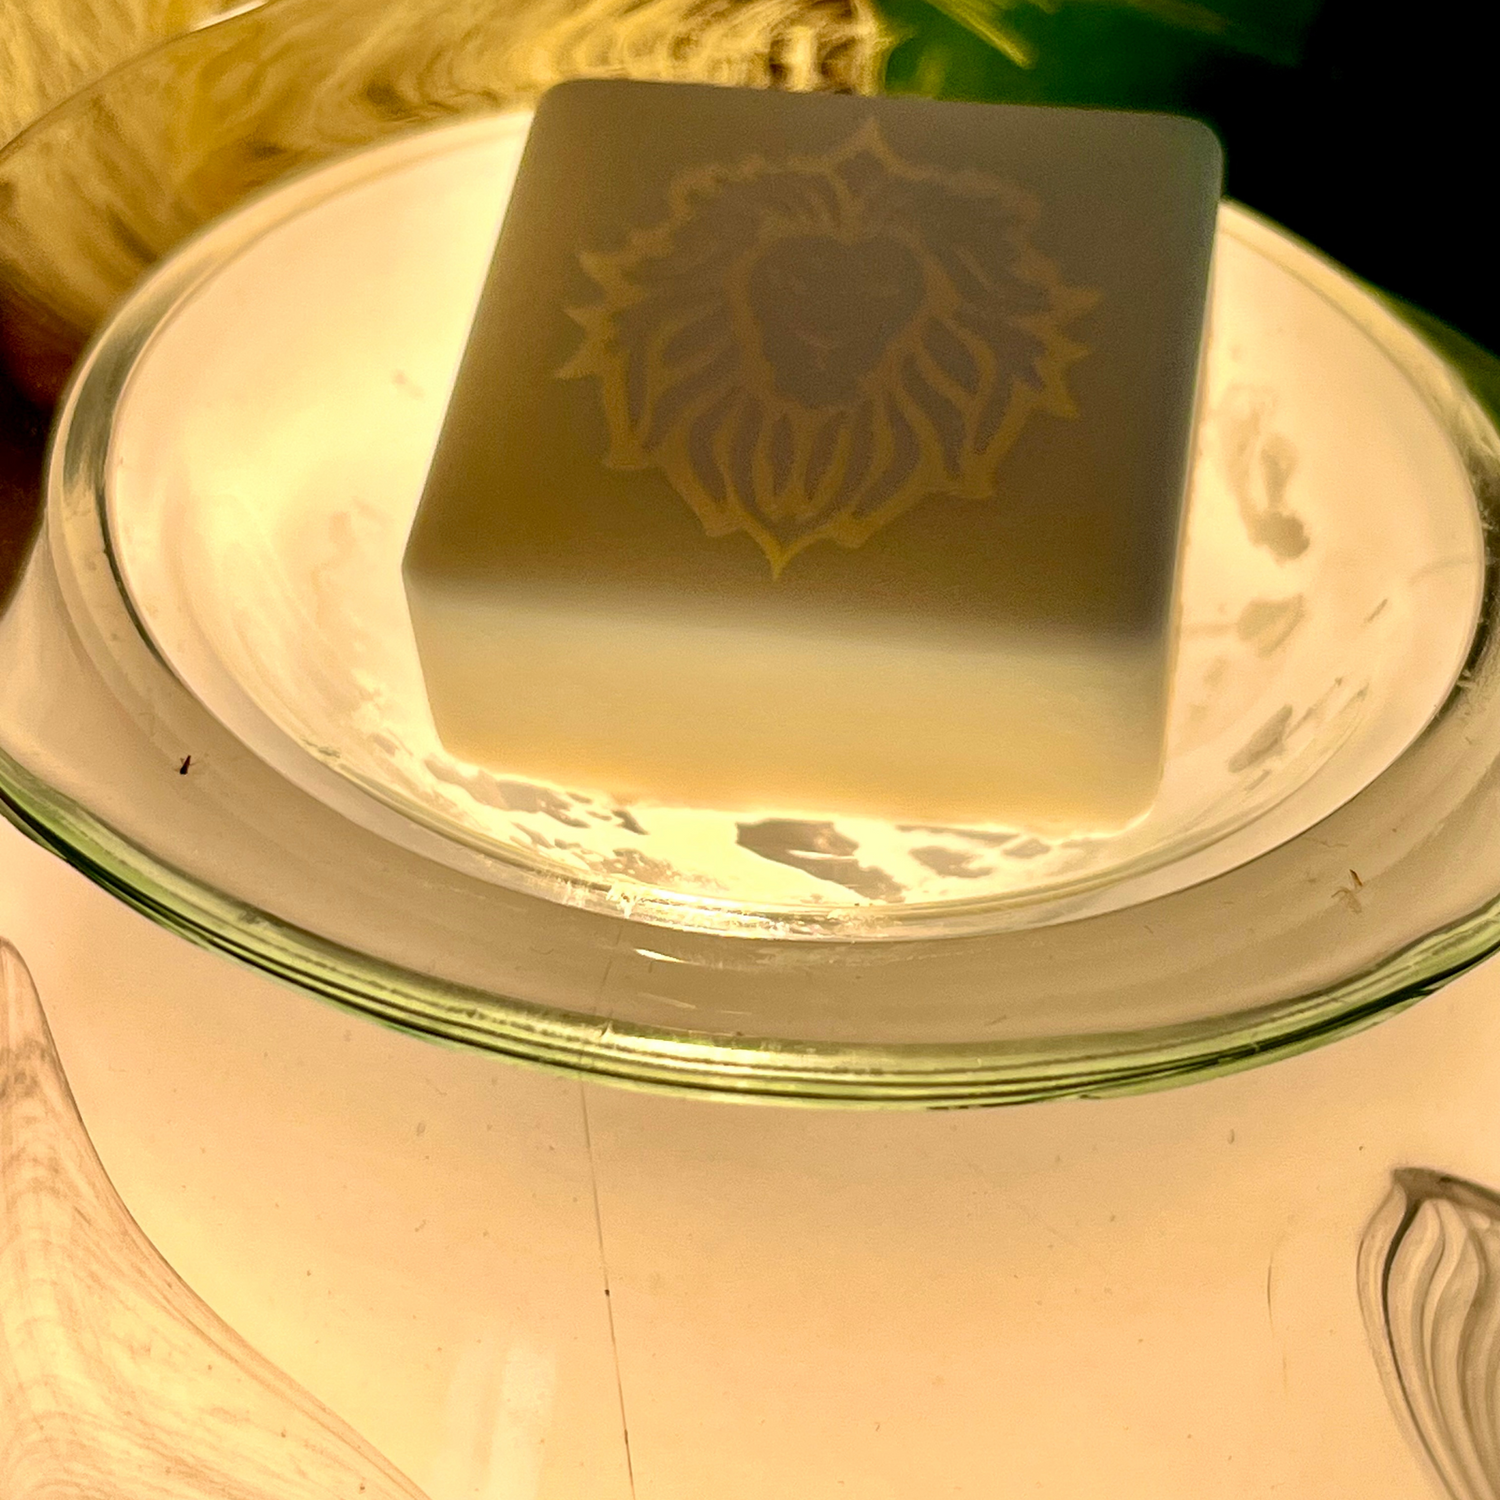 Alchemy7 | Aphrodite - Wax Melts - The Allure of Romance in Each Cube